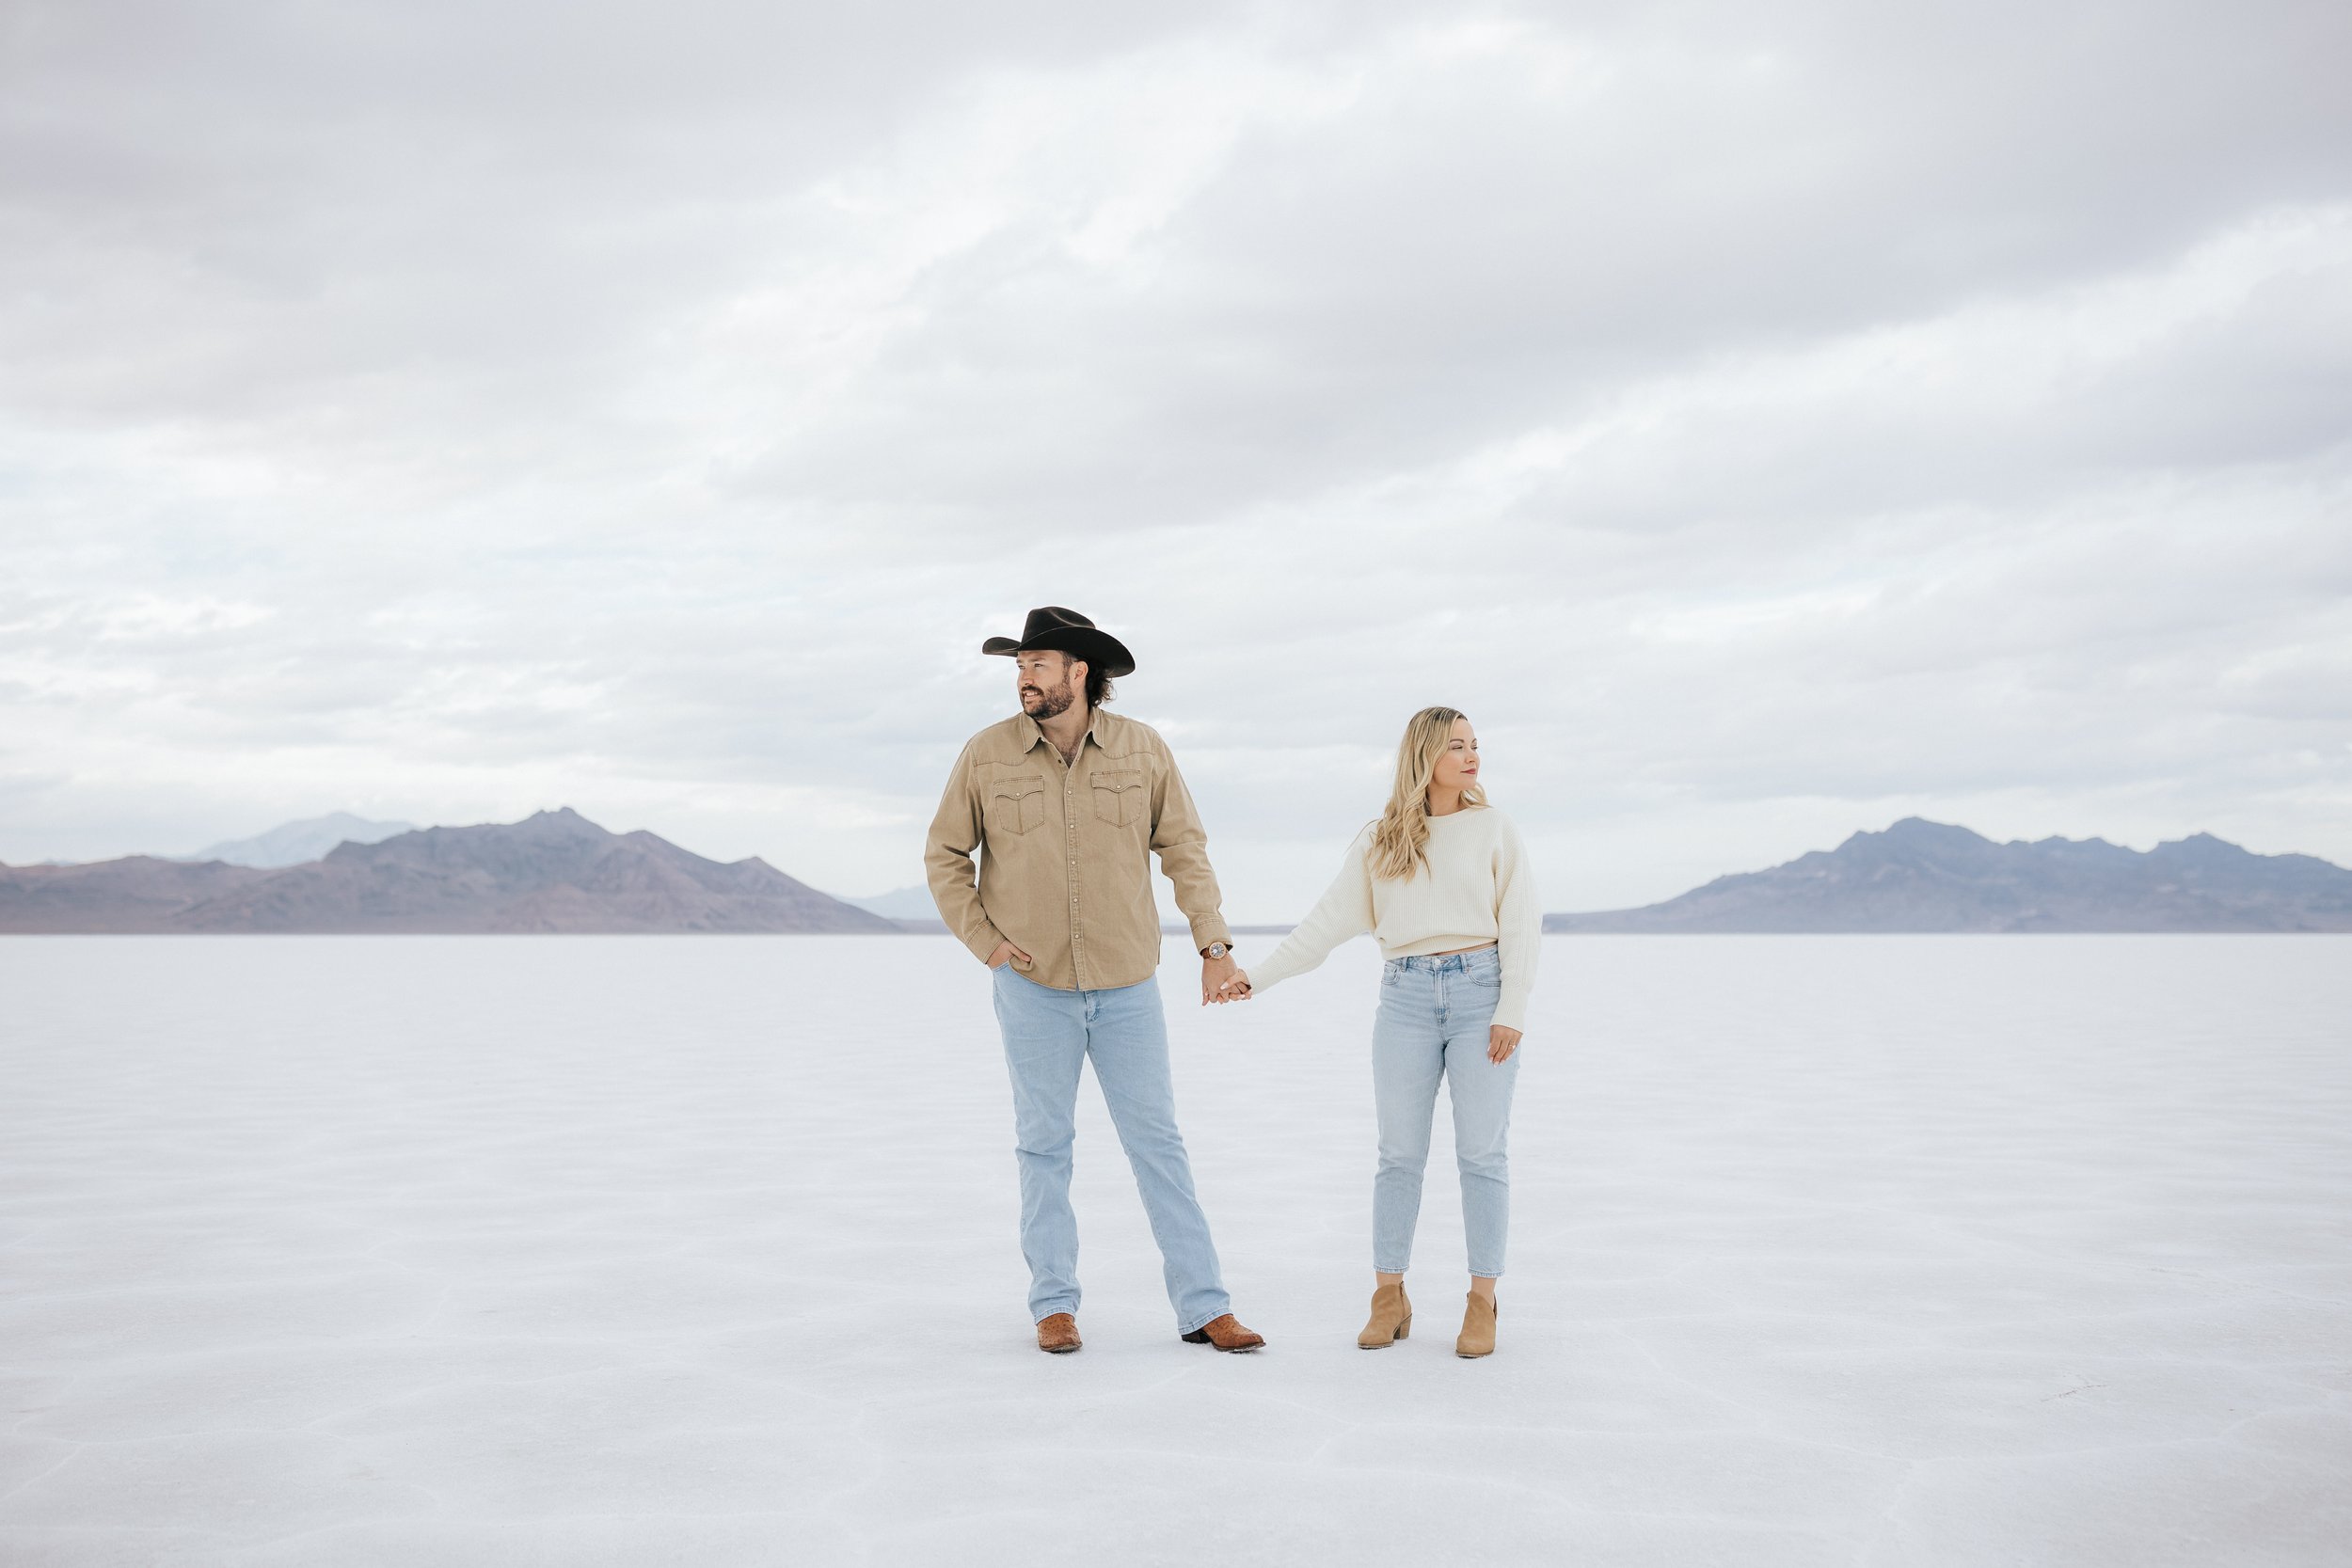  An engaged couple pose for a photo at the Bonneville Salt Flats near Wendover, Nevada and Salt Lake City, Utah. The guy wears a cowboy hat and the couple is looking away from each other. The Salt Flats are white and the sky is overcast. The mountain